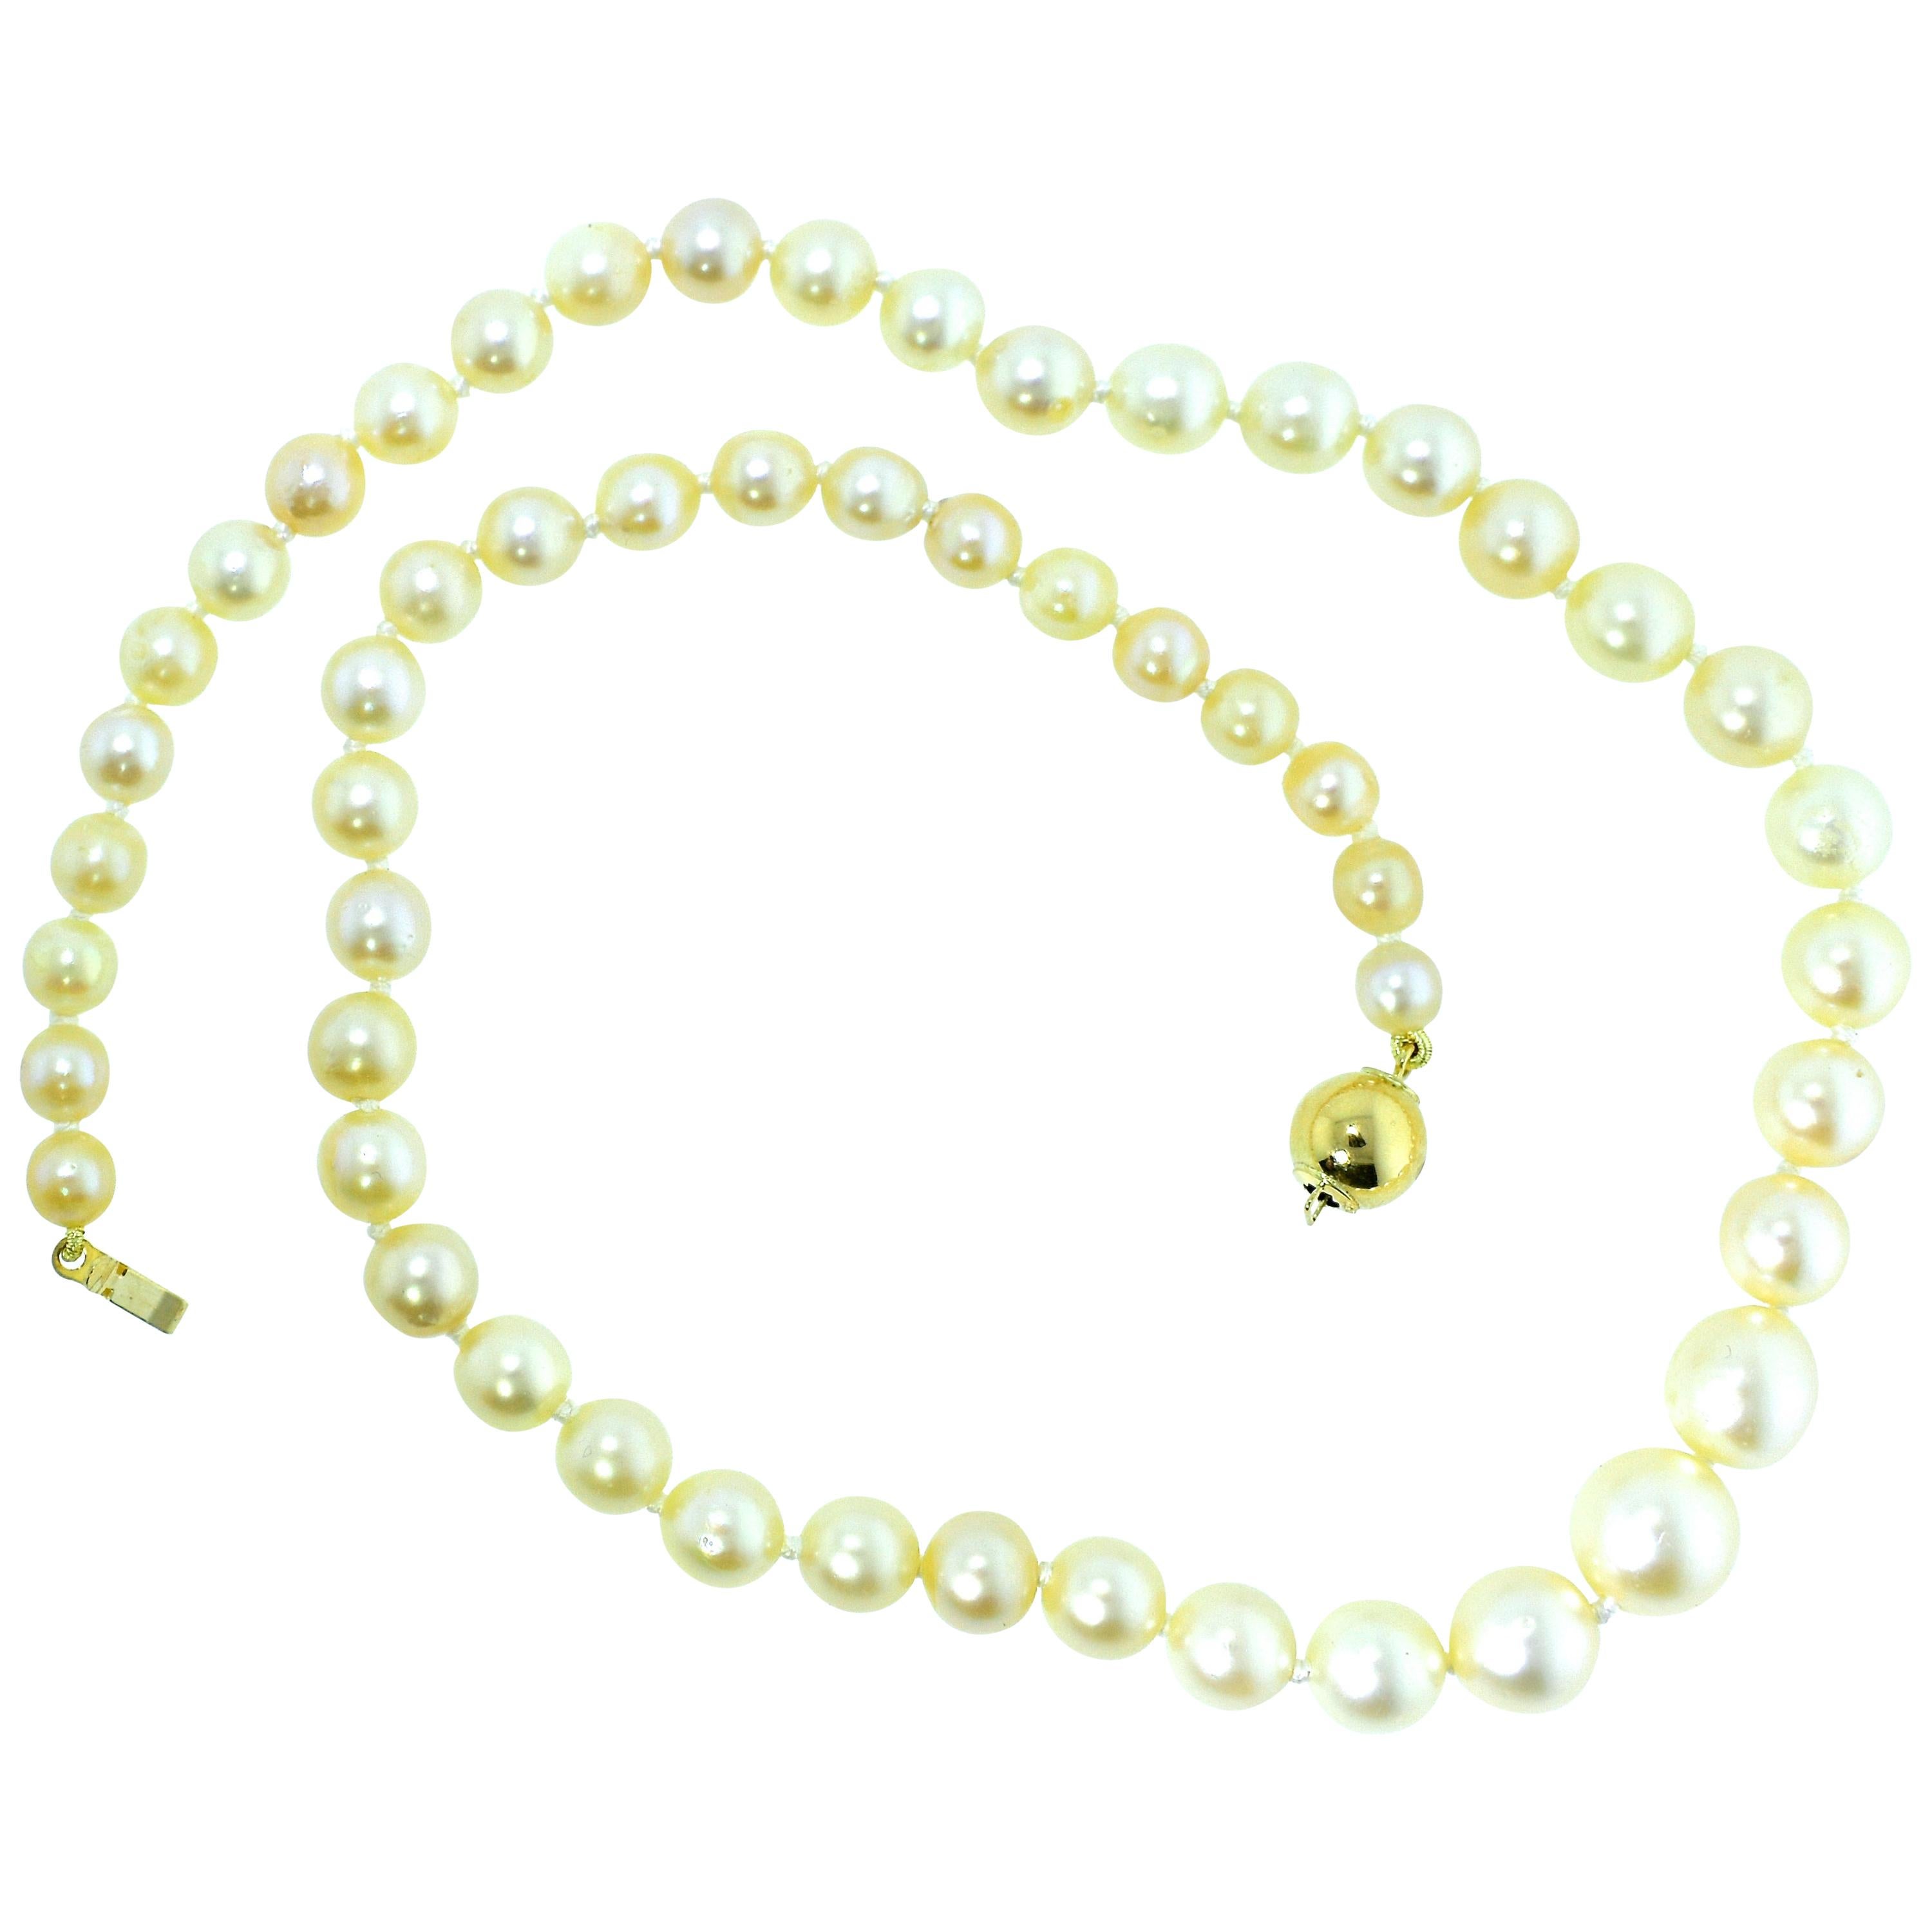 Strand of Fine Cultured Akoya Pearls with a Gold Clasp